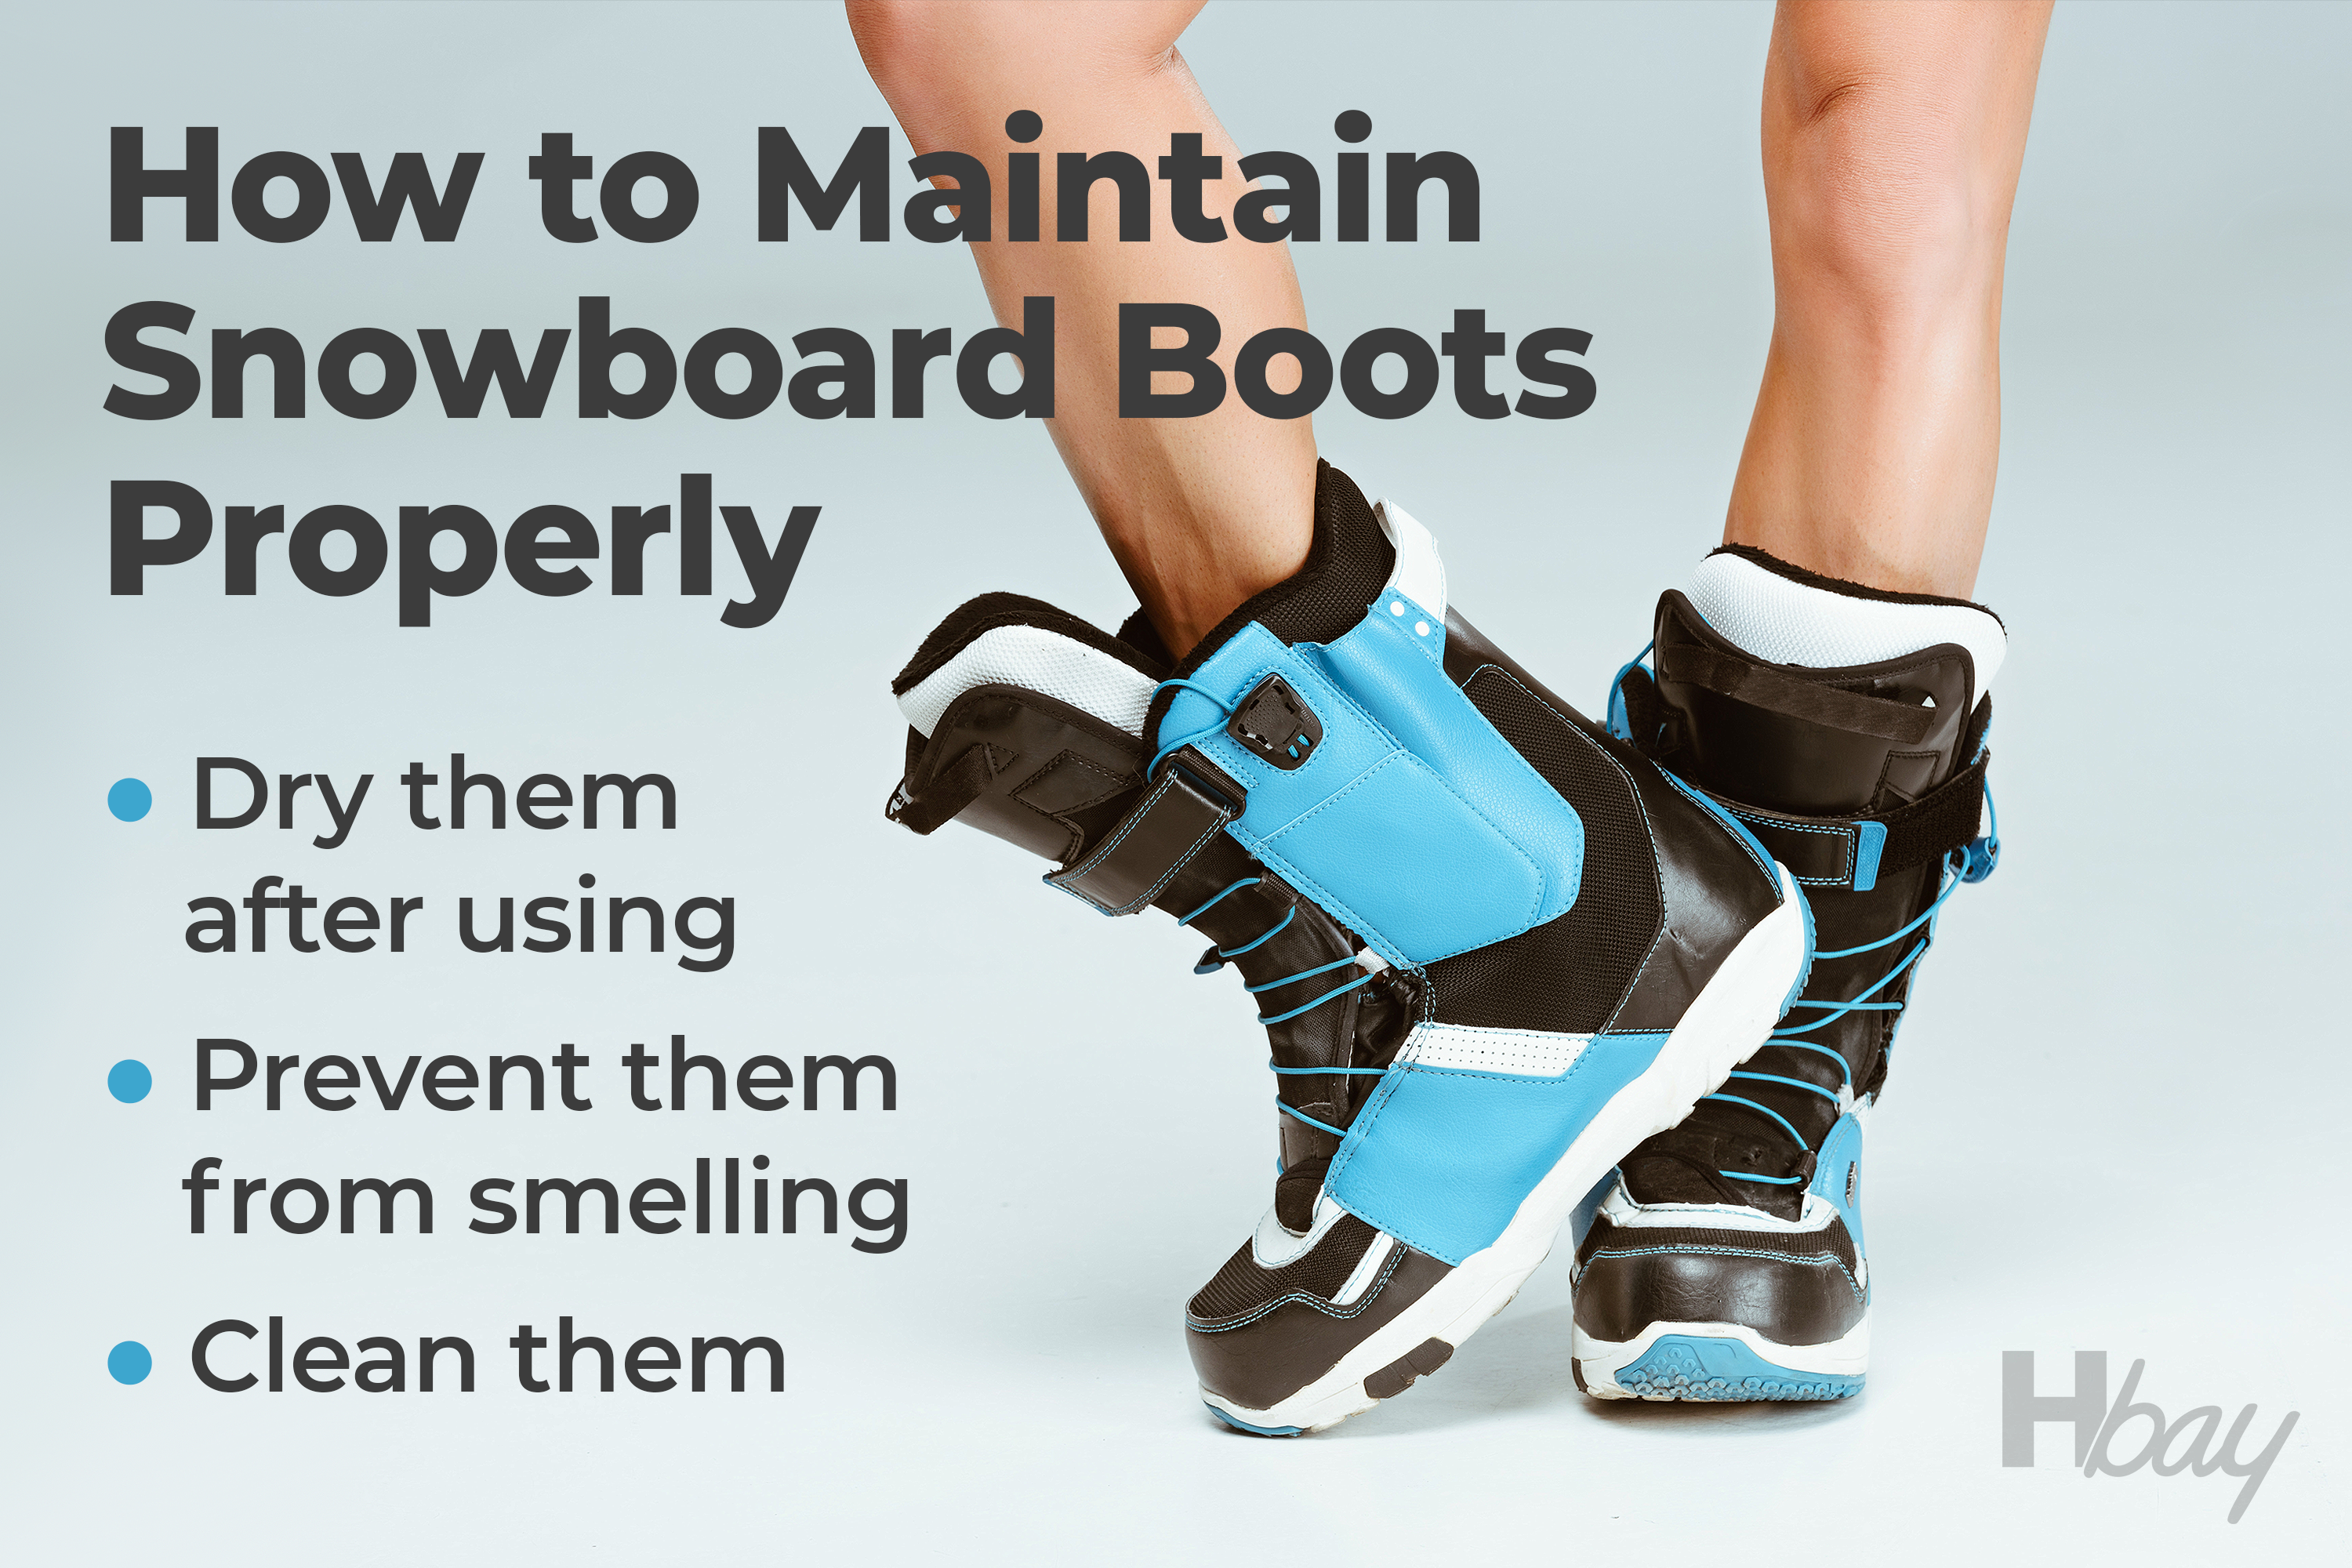 How to Maintain Snowboard Boots Properly